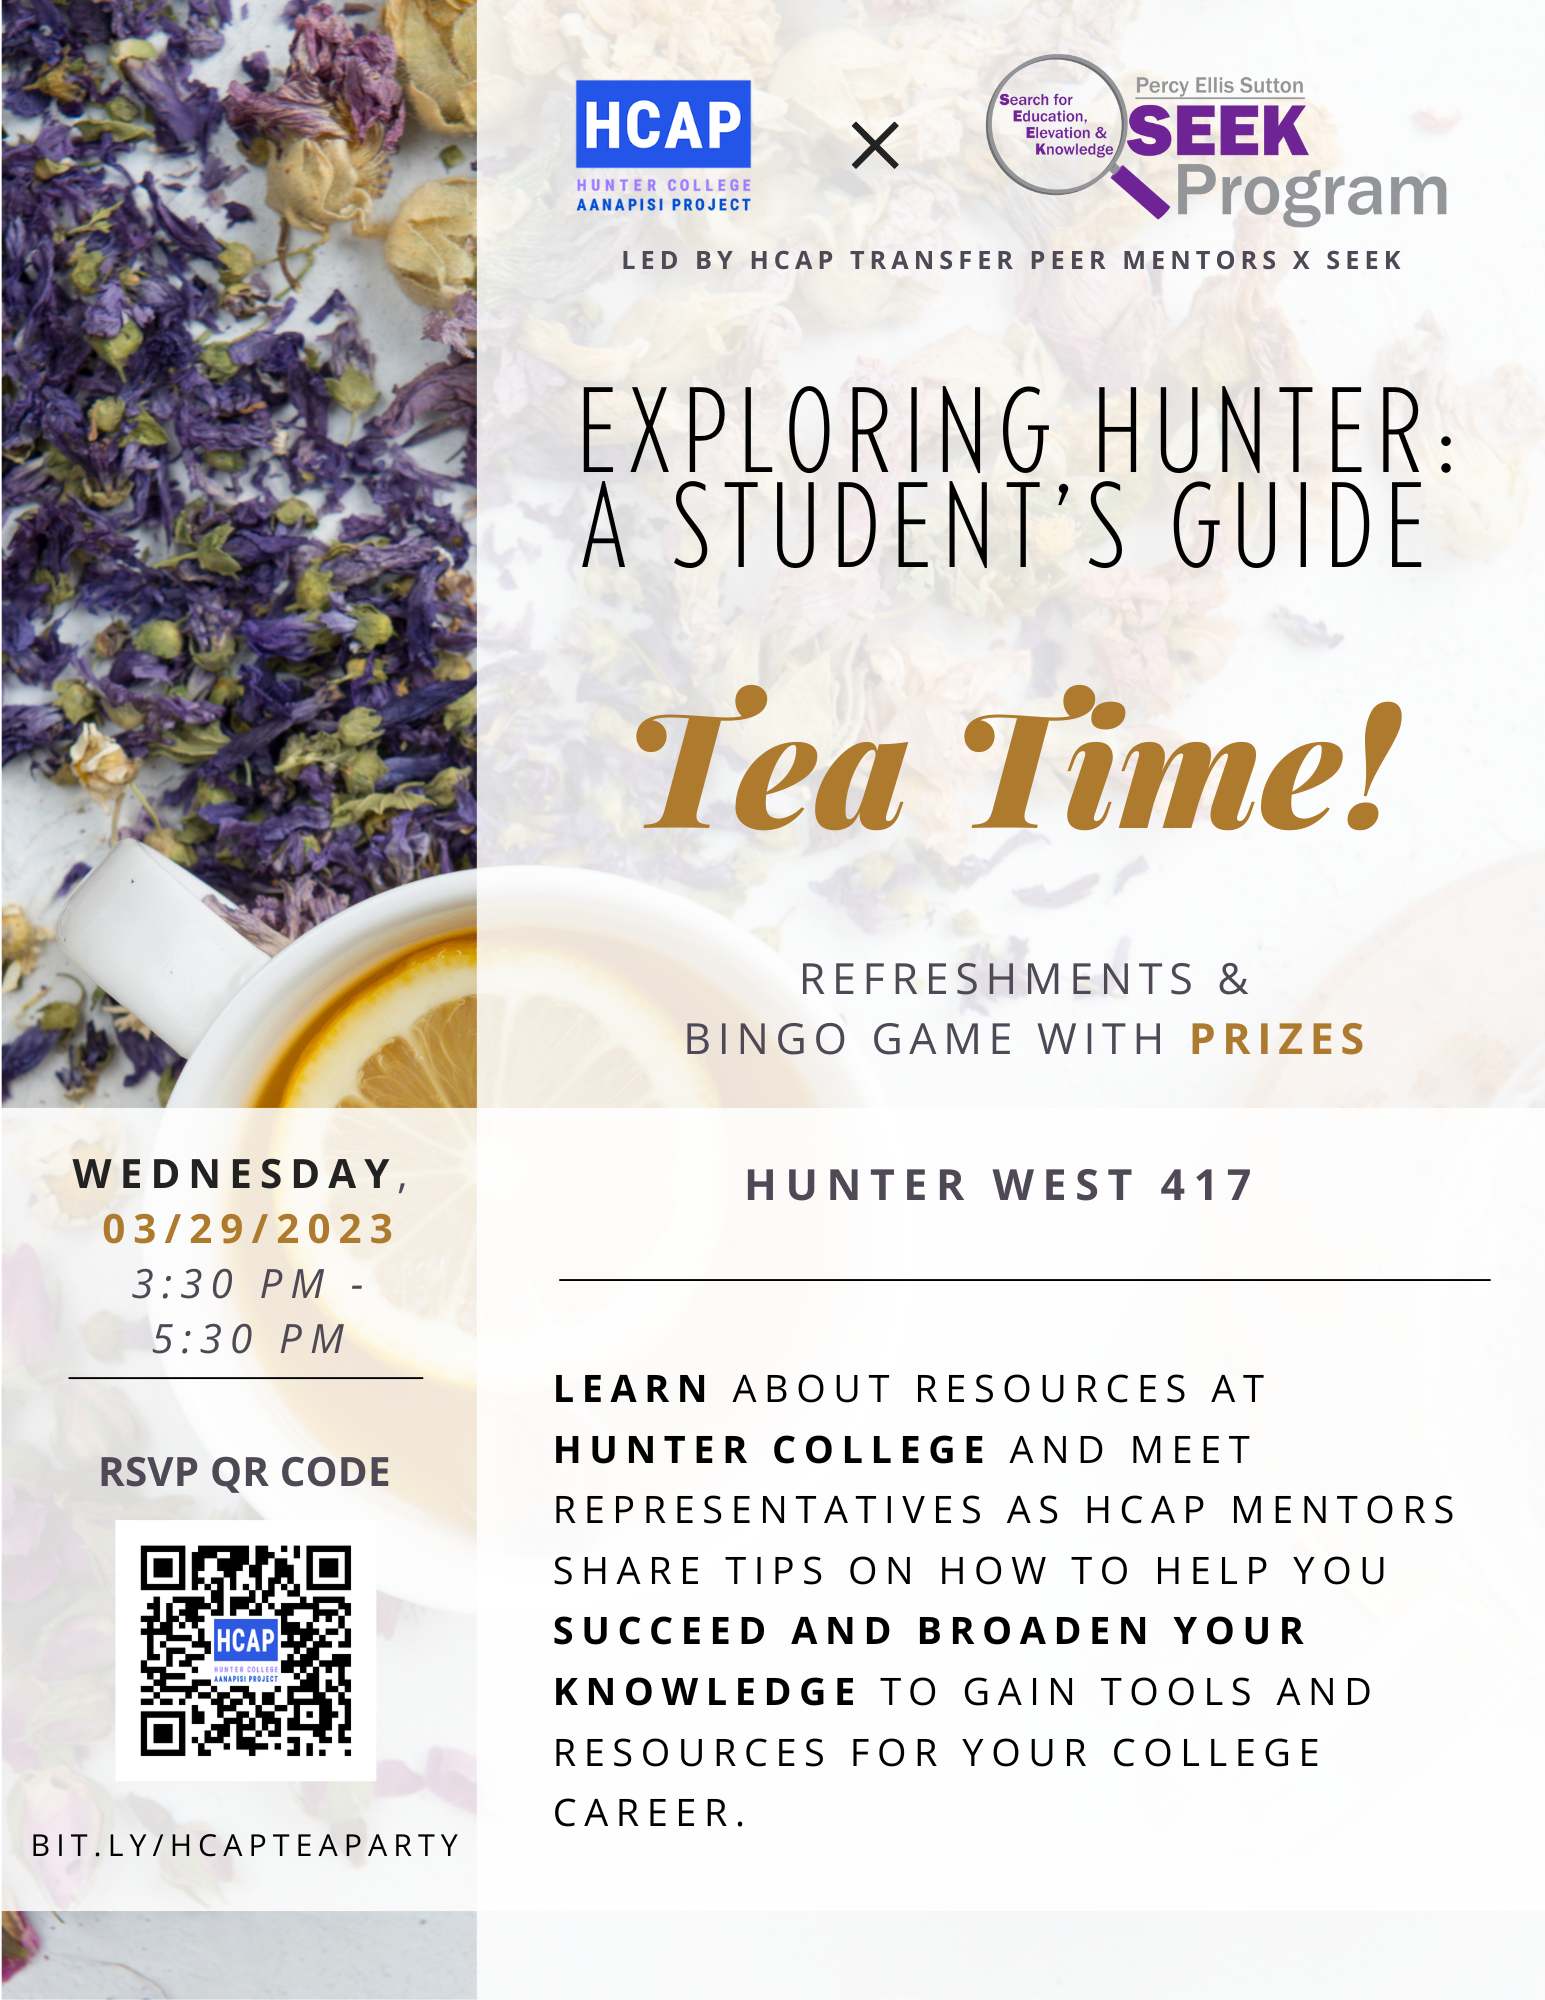 Learn about resources at Hunter College and meet representatives as HCAP Mentors share tips on how to help you succeed and broaden your knowledge to gain tools and resources for your college career.